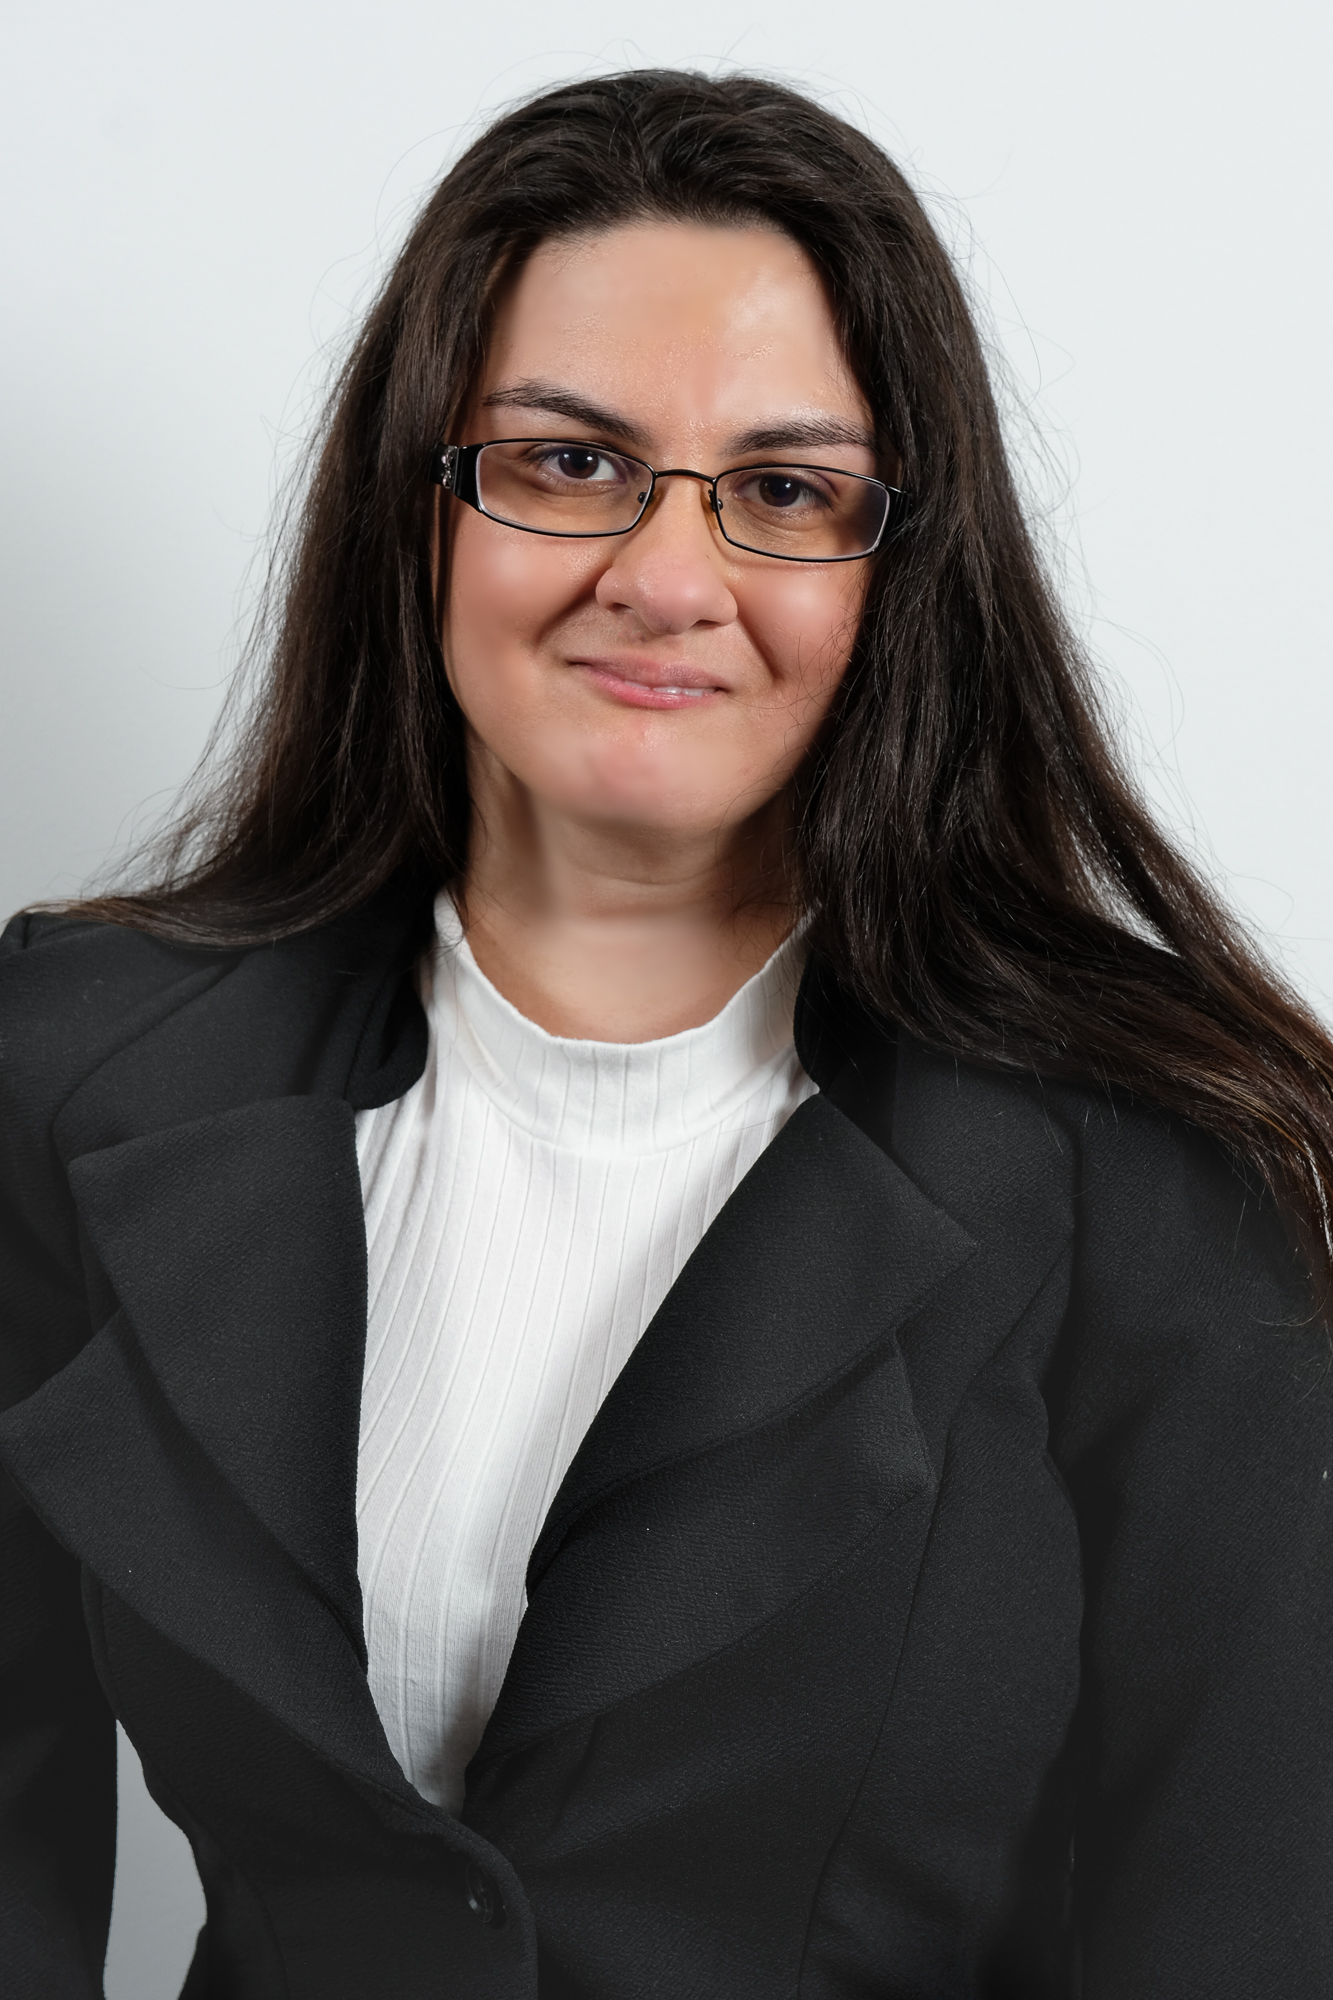 Headshot of Jessica Lopez, a young woman with long, straight brown hair and glasses wearing a white top and black suit jacket